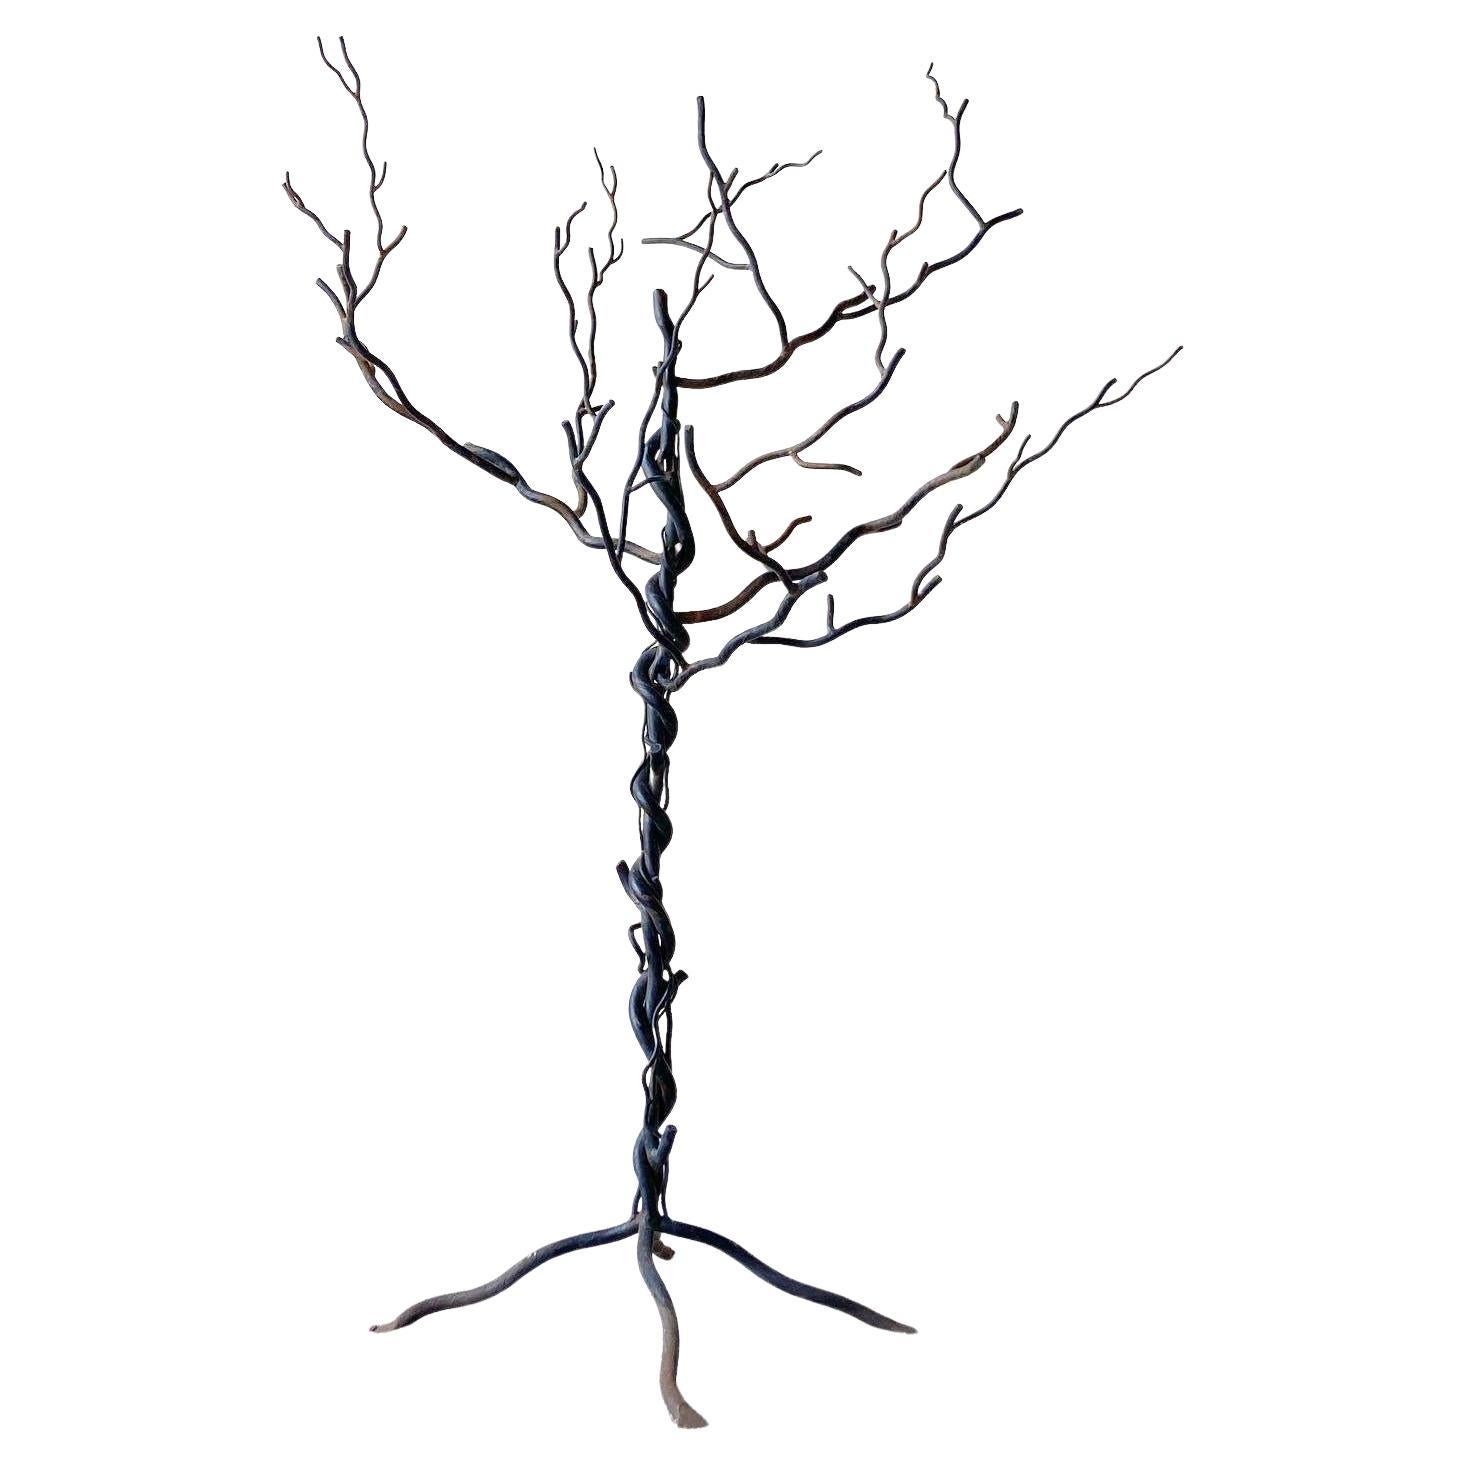 Vintage Hand Made Wrought Iron Tree Sculpture